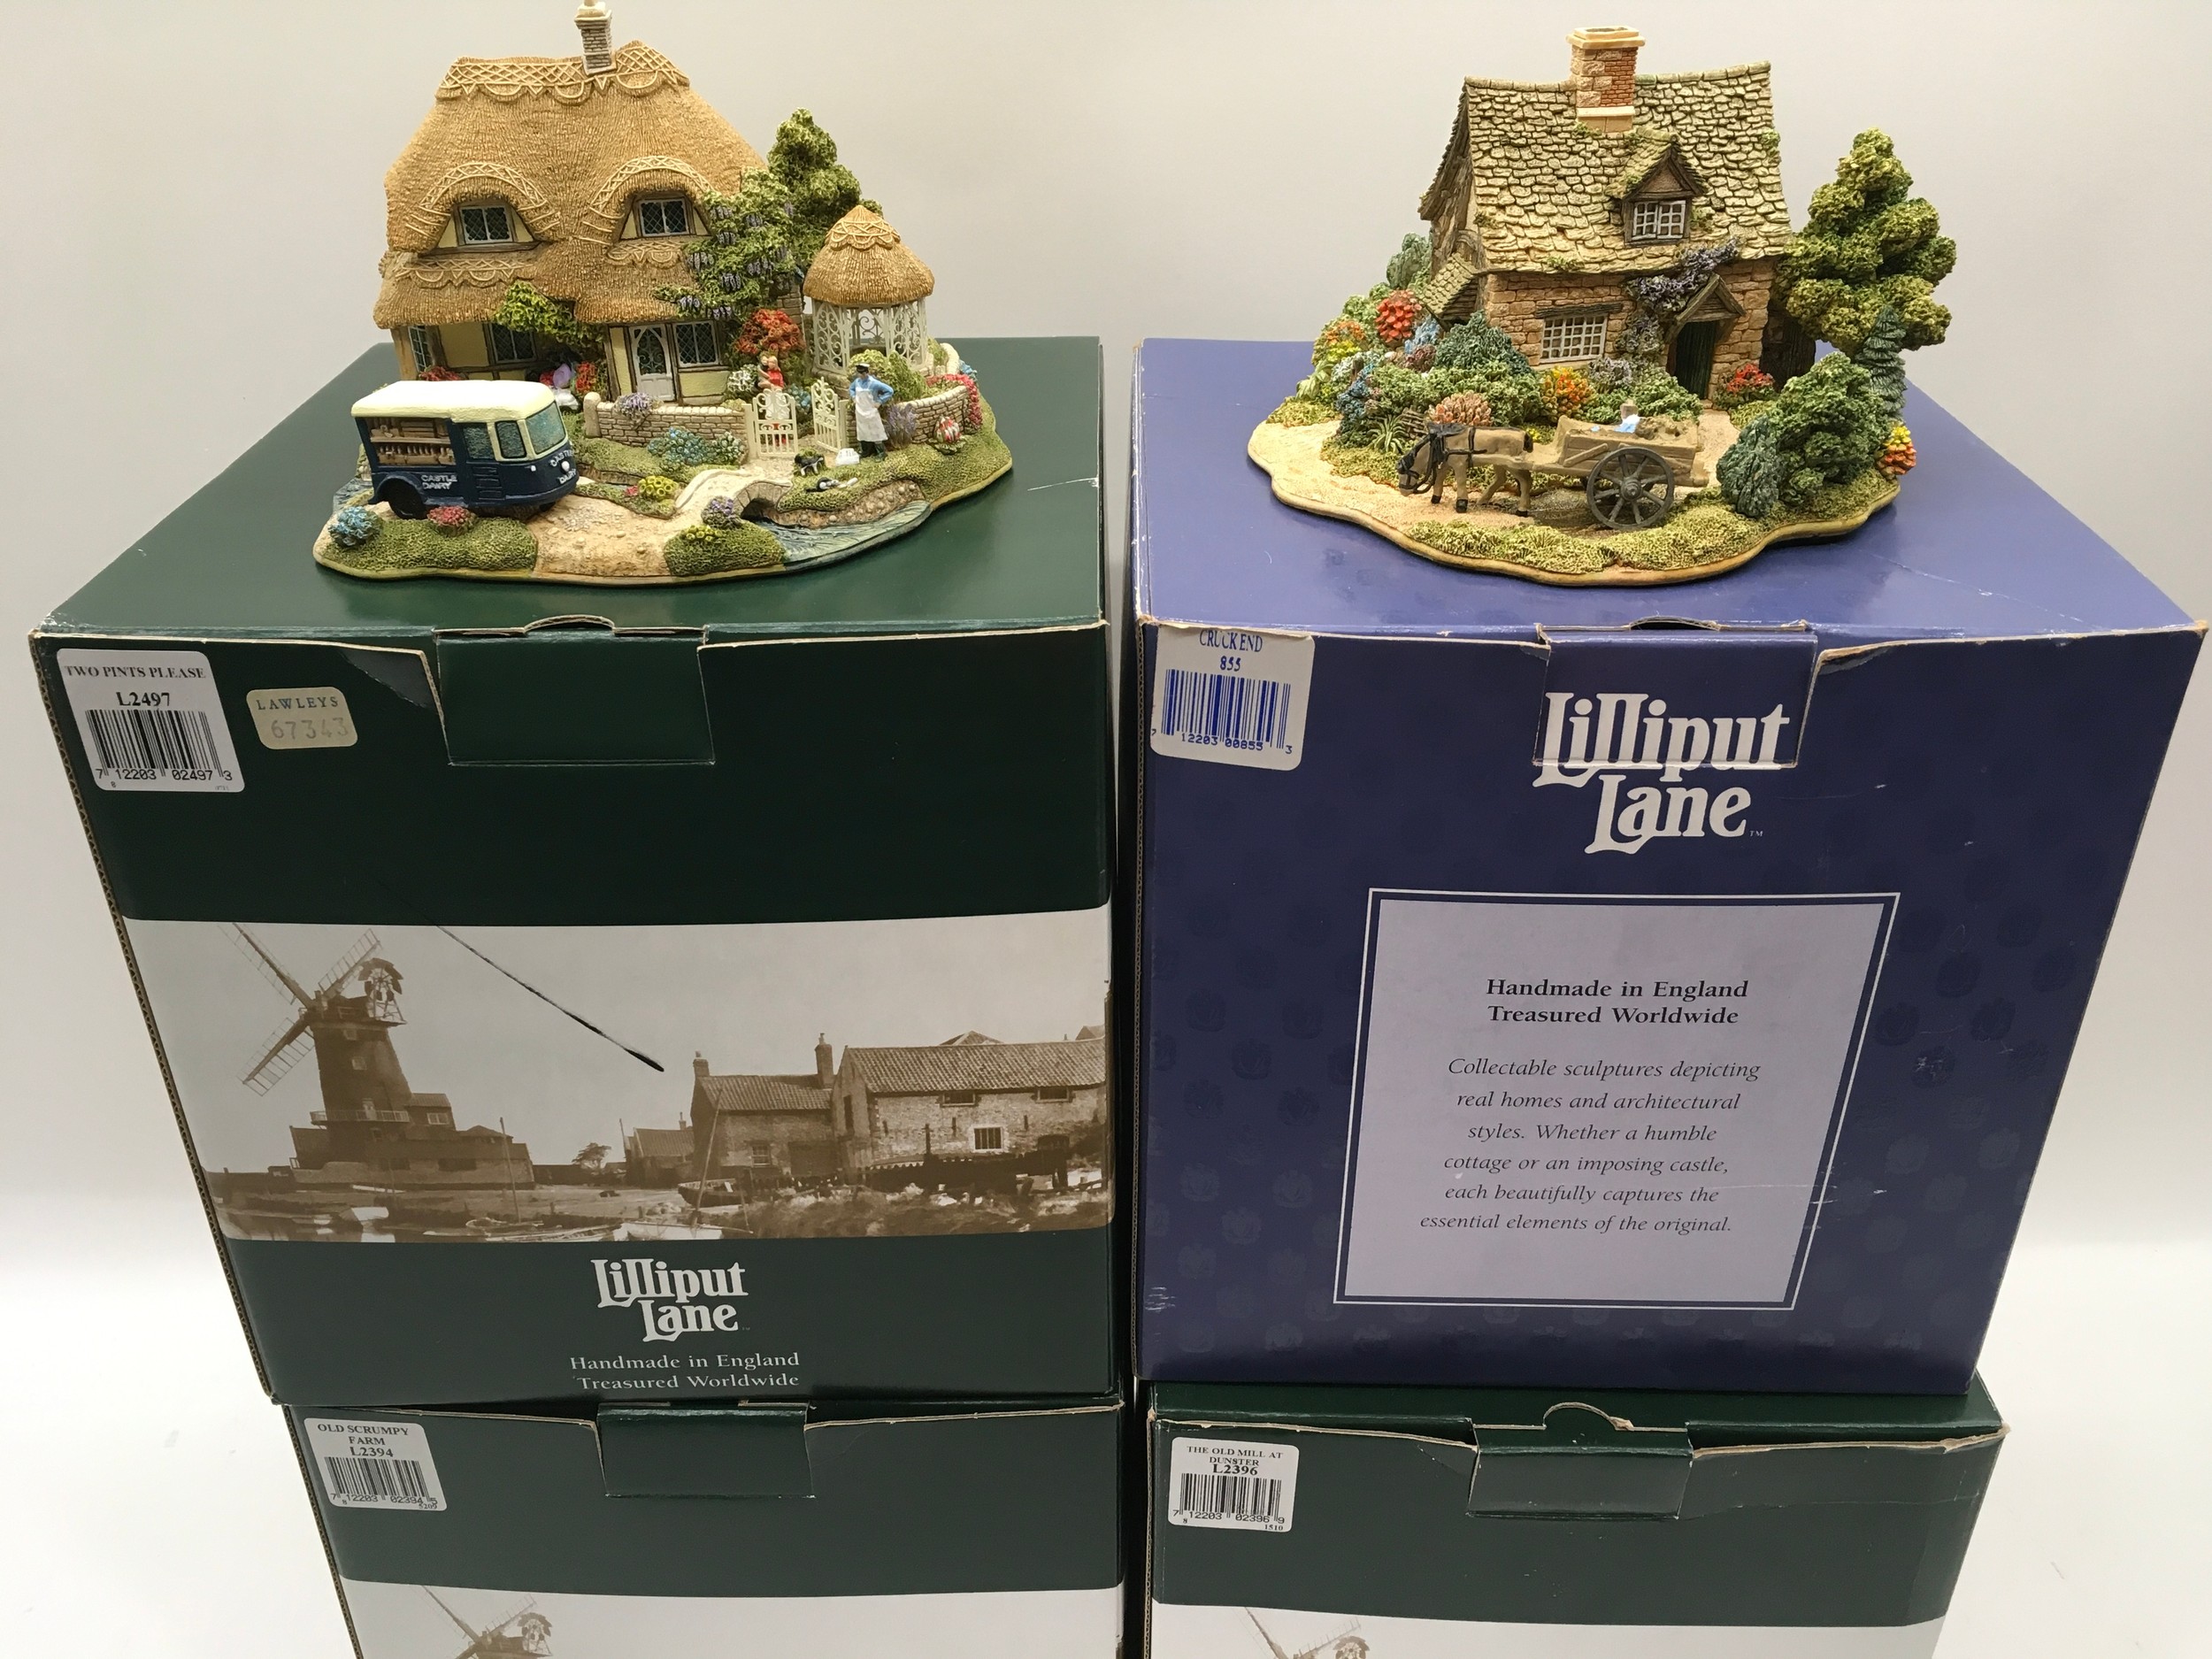 Four Lilliput Lane incl. Two pins please L2497, Cruck End 855, Old Scrumpy Farm L2394 and he old - Image 2 of 2